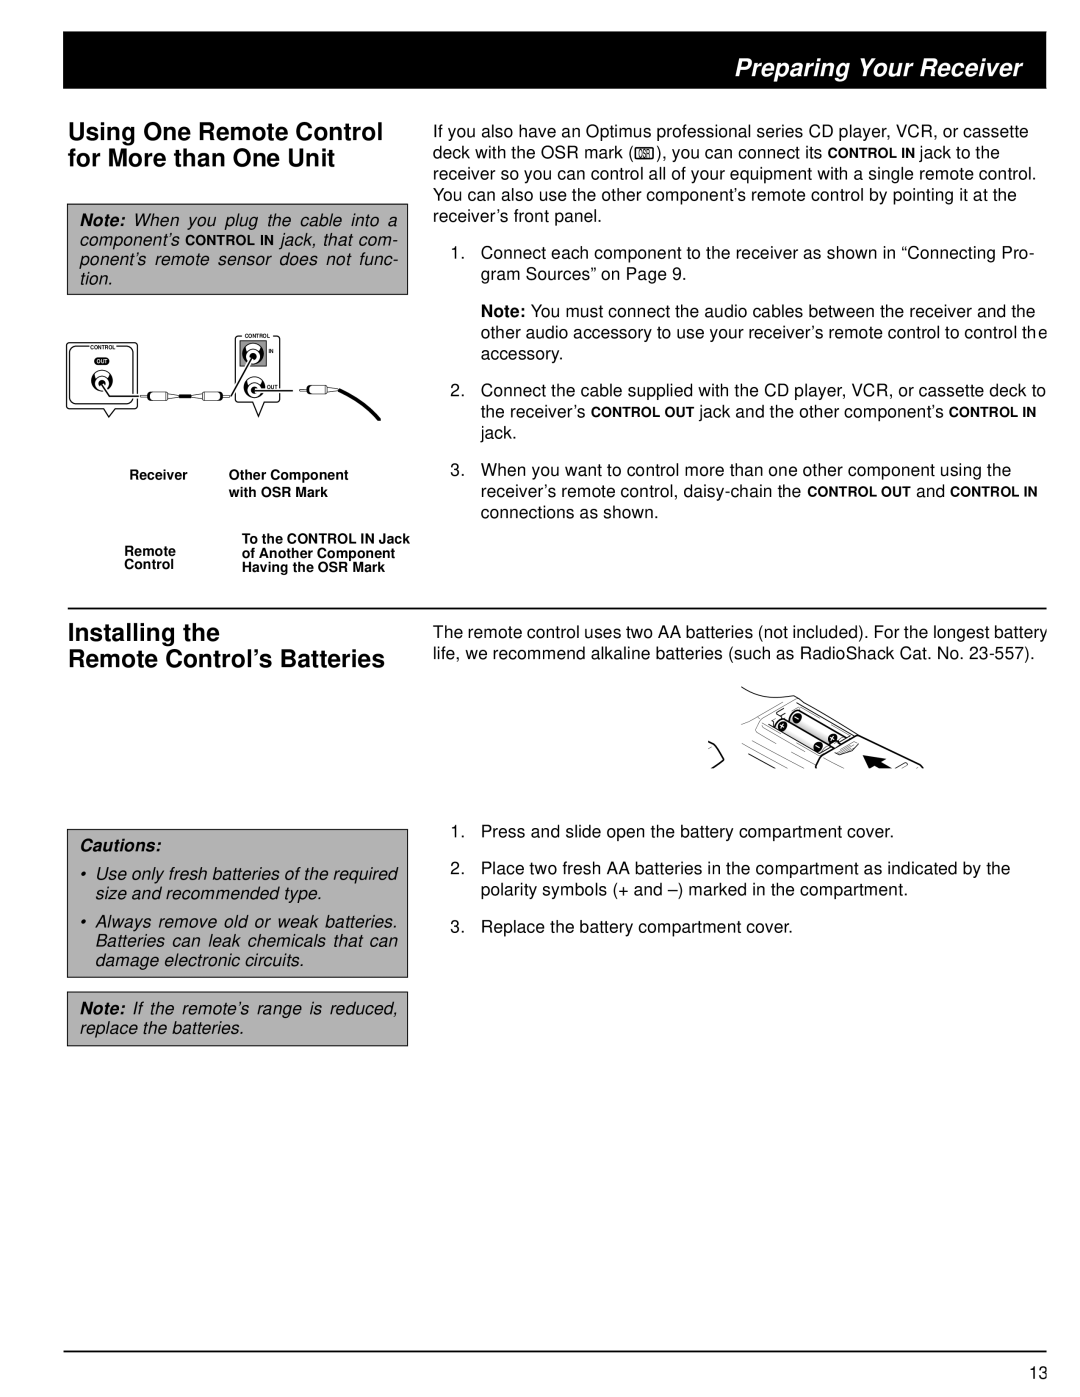 Optimus 31-3042 owner manual Preparing Your Receiver, Installing the Remote Control’s Batteries, Cautions 